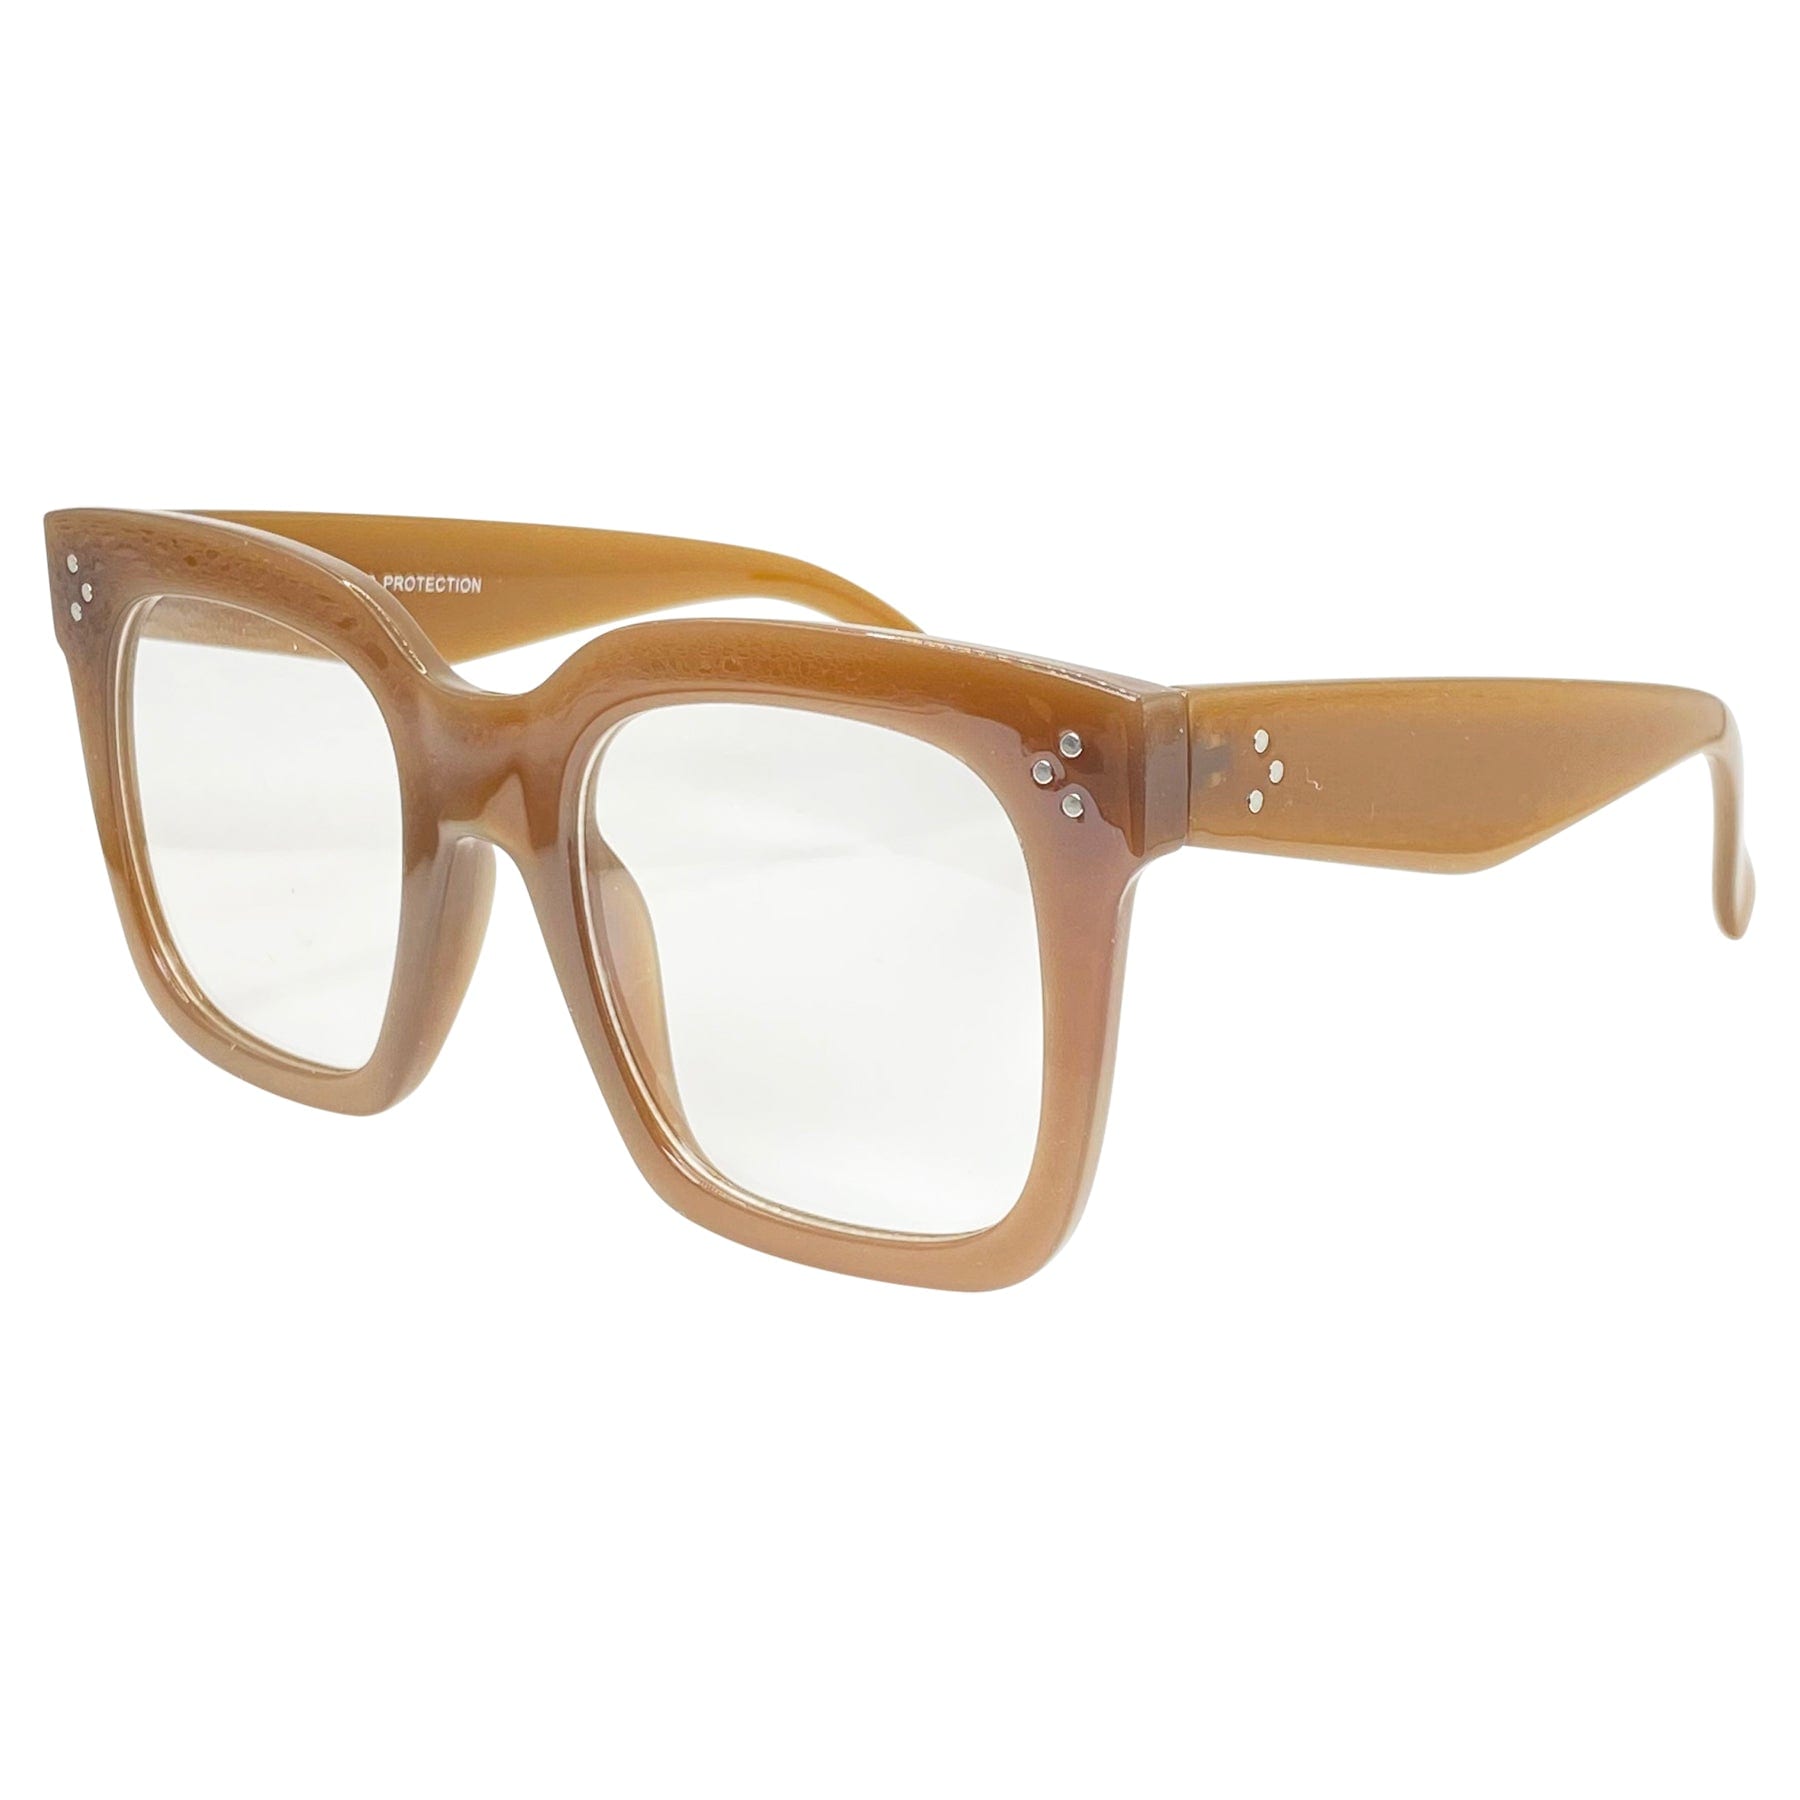 brown colored glasses with a chunky big square frame